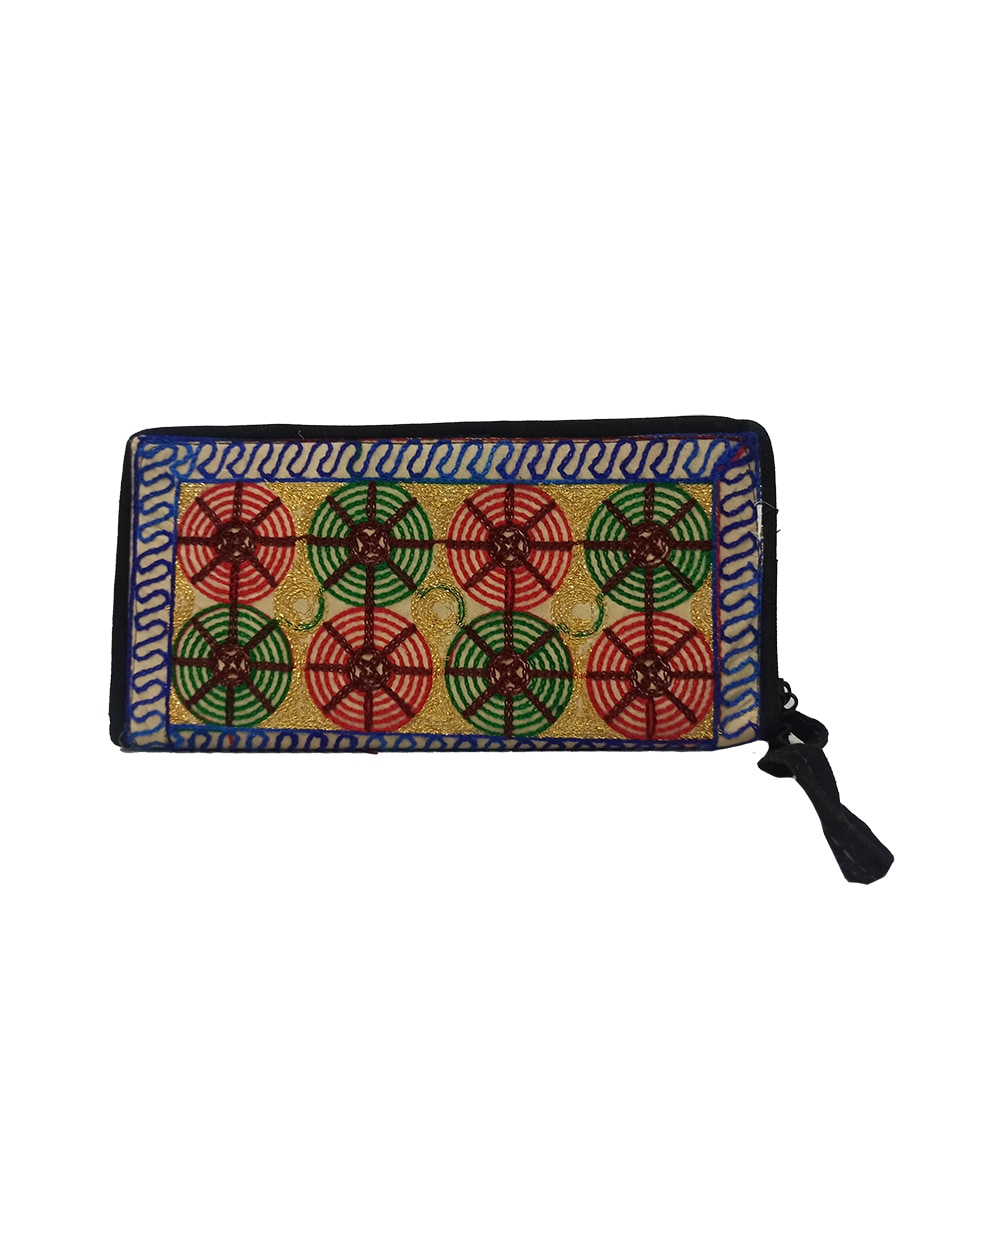 sindhi-embrodiery-purse-7